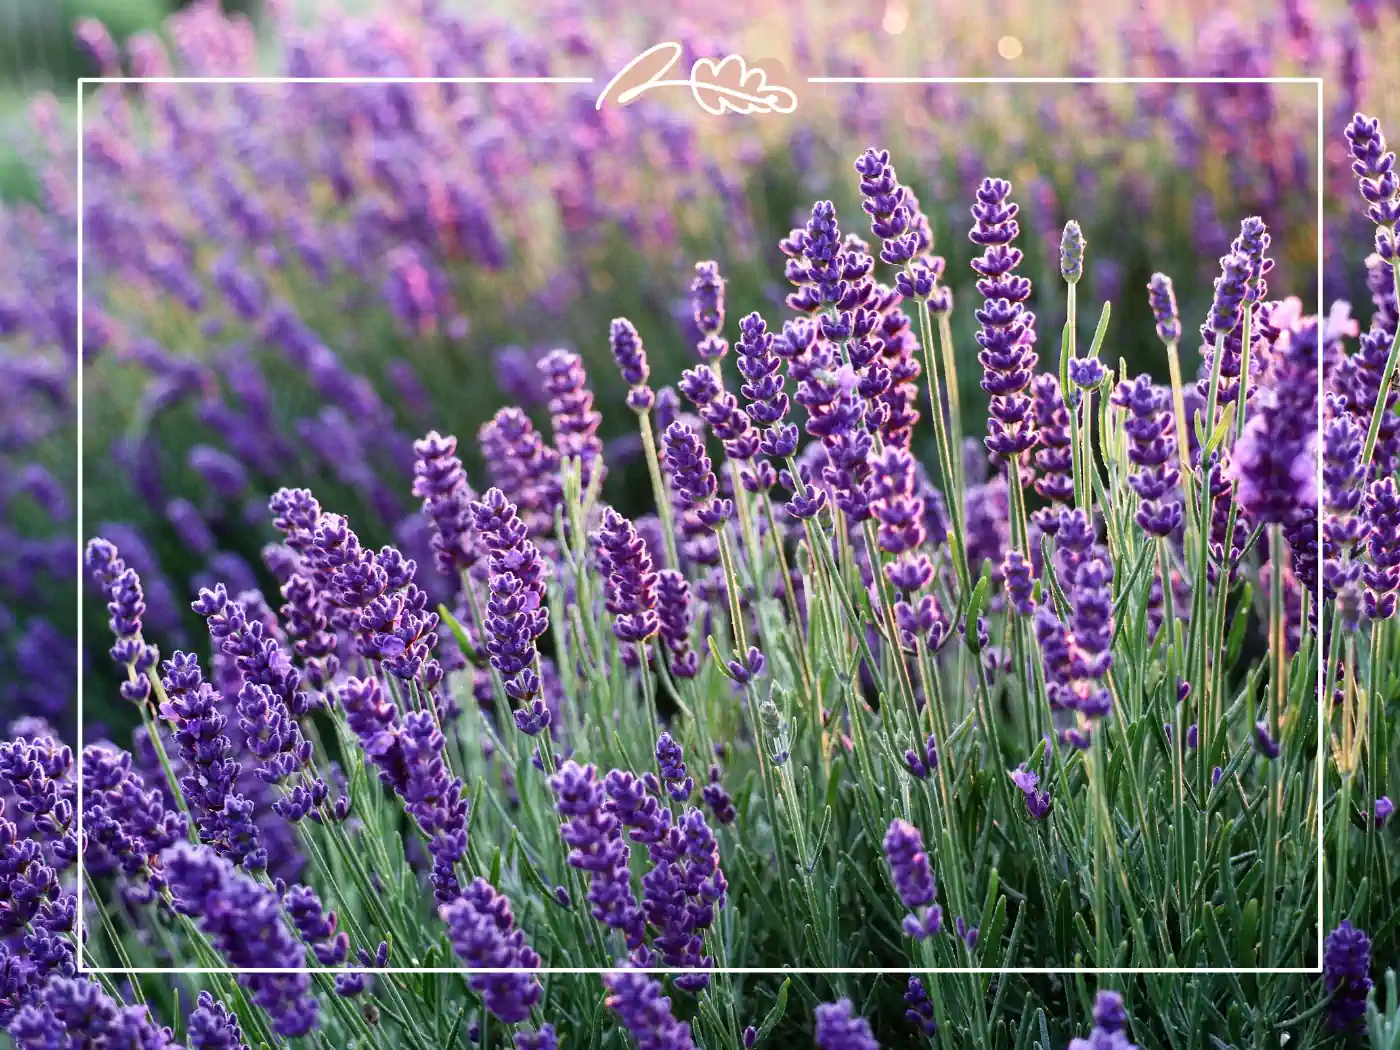 A field of purple lavender flowers under the soft glow of twilight. Fabulous Flowers and Gifts.